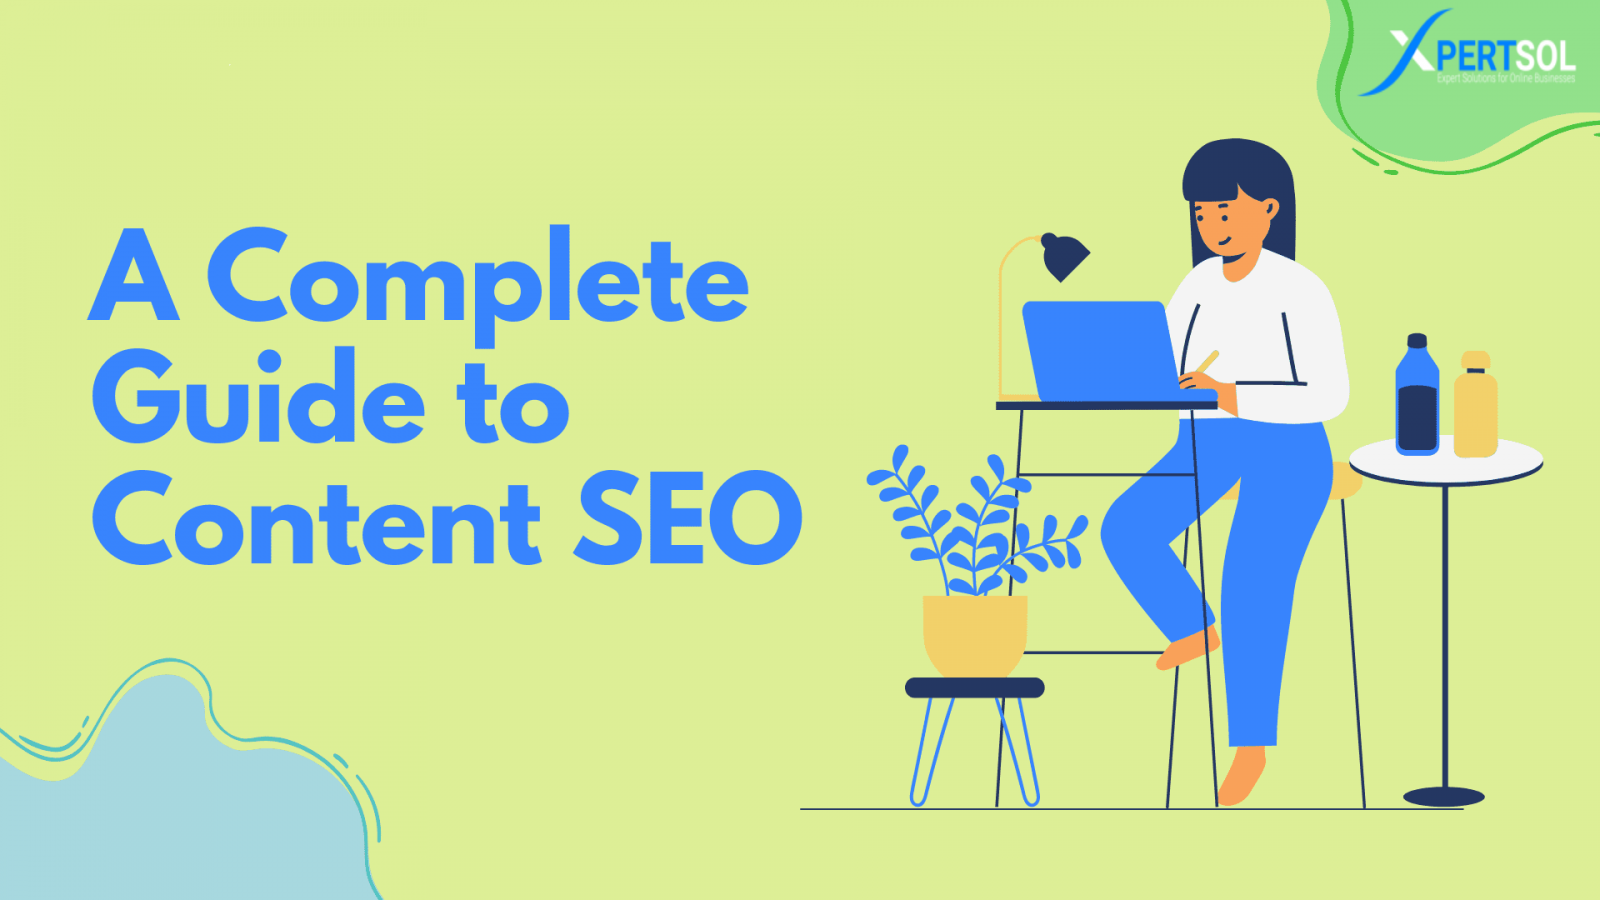 Content Strategy Is Prime for Your SEO Results